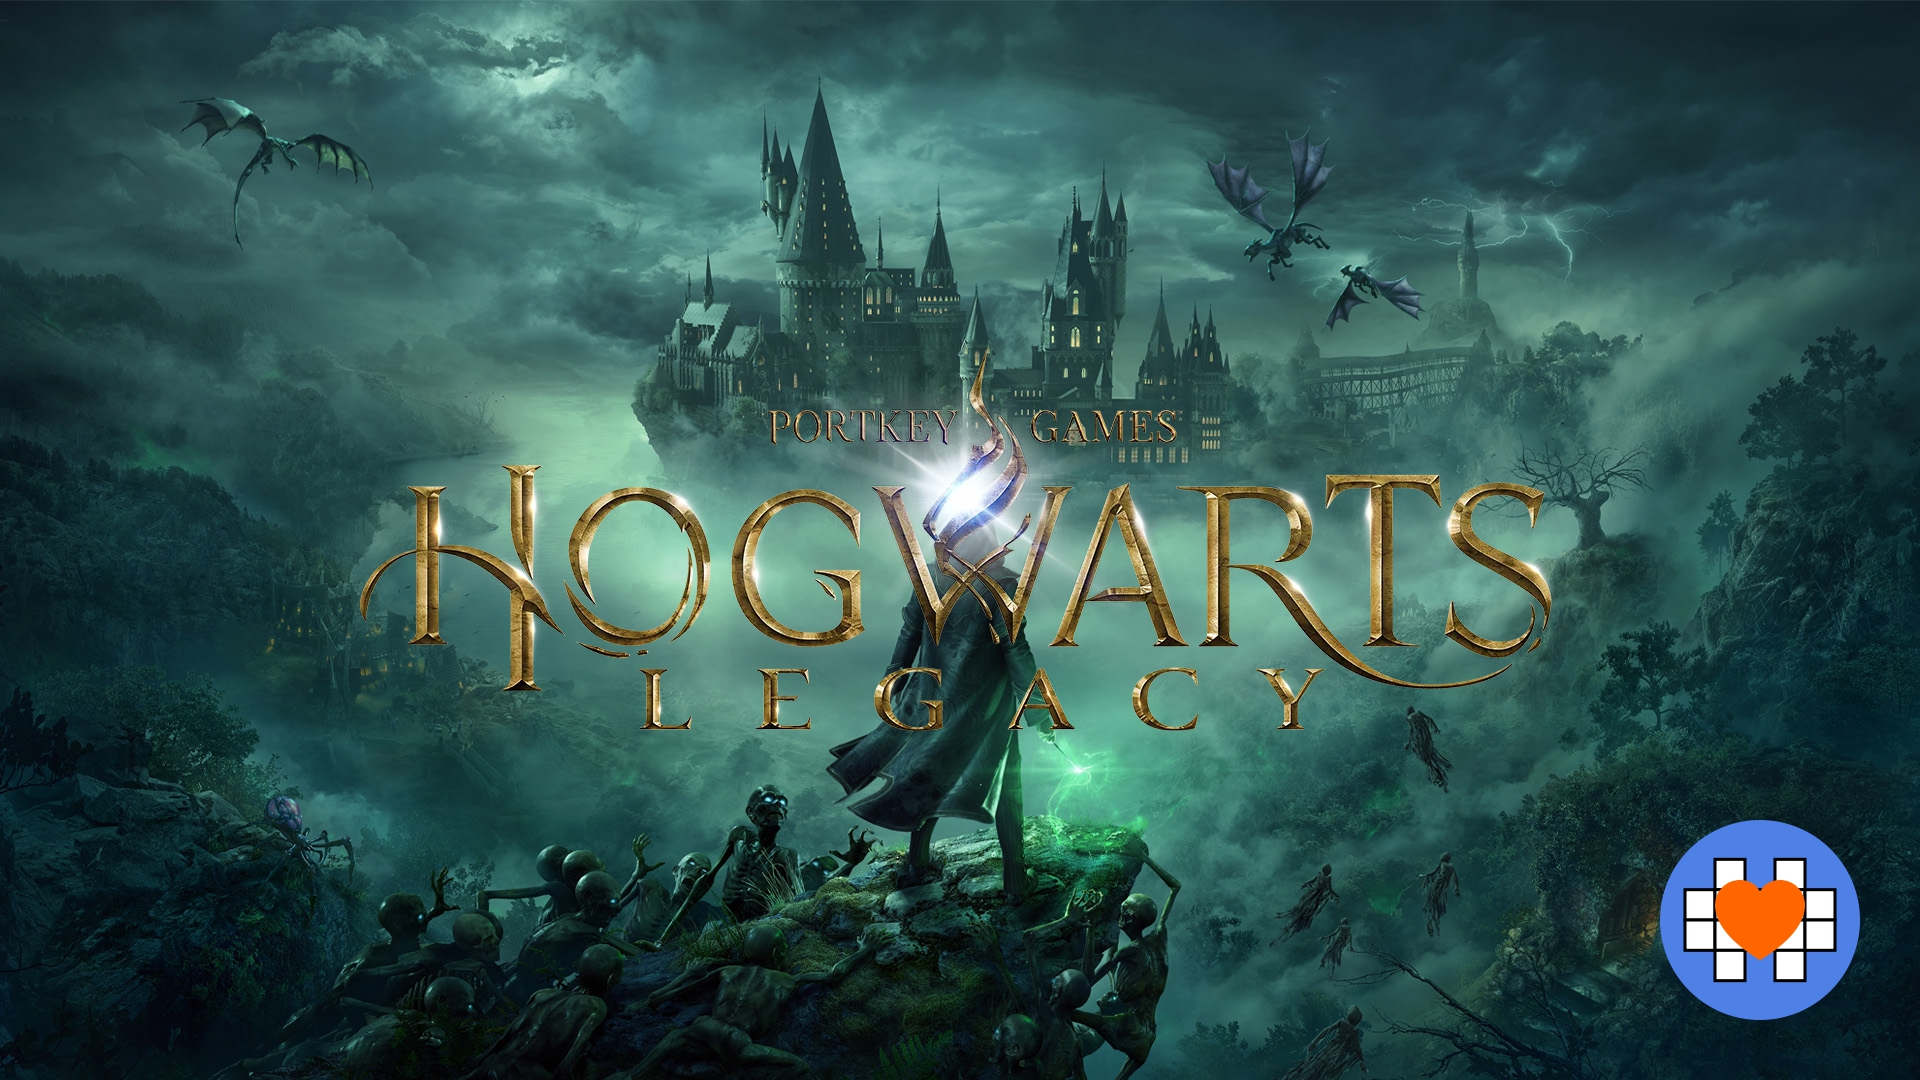 Hogwarts Legacy: the most magical video game of the year available